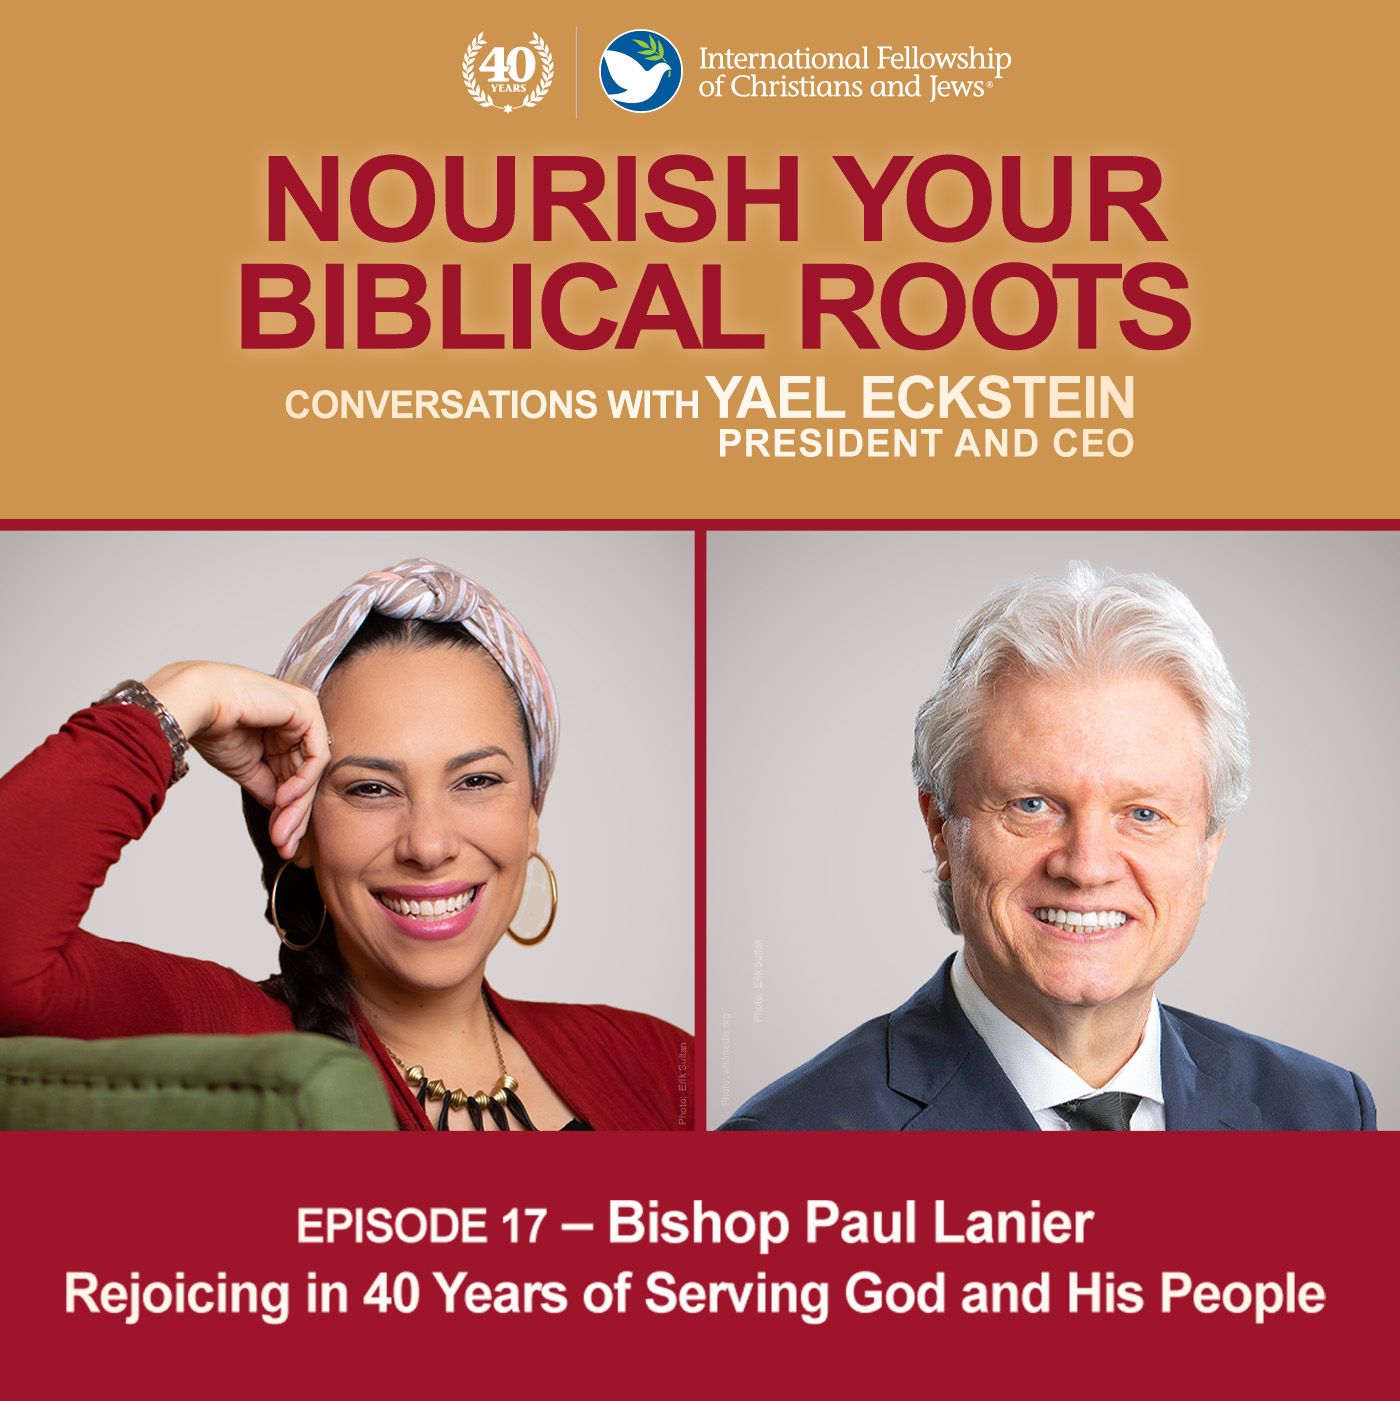 Conversations with Yael Eckstein: Bishop Paul Lanier — Rejoicing in 40 Years of Serving God and His People